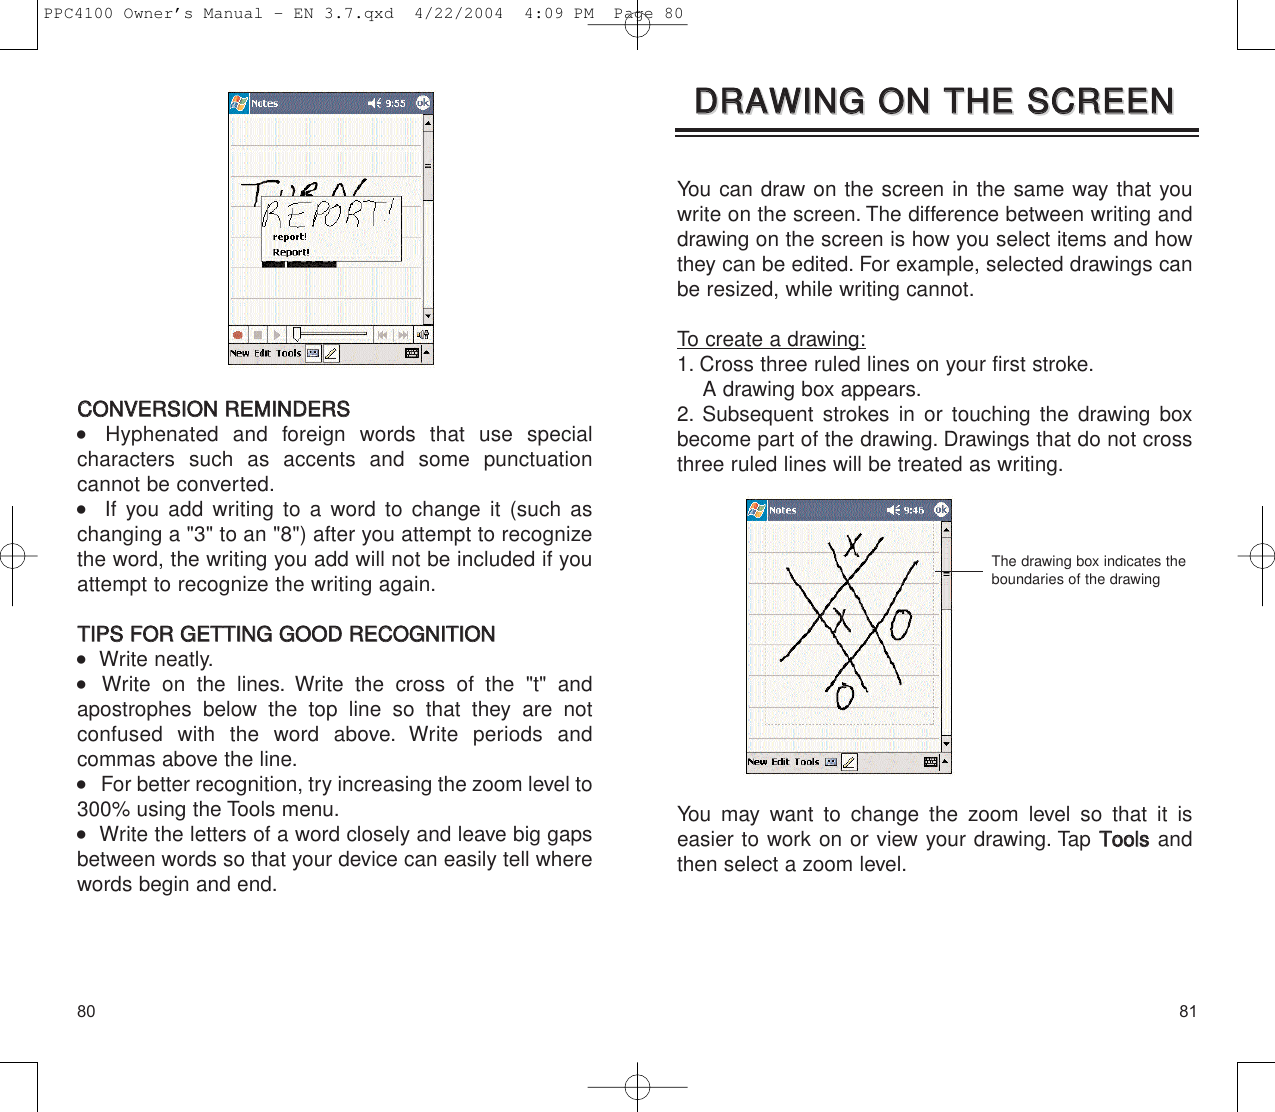 8180You can draw on the screen in the same way that youwrite on the screen. The difference between writing anddrawing on the screen is how you select items and howthey can be edited. For example, selected drawings canbe resized, while writing cannot.To create a drawing:1. Cross three ruled lines on your first stroke.A drawing box appears.2. Subsequent strokes in or touching the drawing boxbecome part of the drawing. Drawings that do not crossthree ruled lines will be treated as writing.You may want to change the zoom level so that it is easier to work on or view your drawing. Tap TToooollssandthen select a zoom level.DDRRAAWWIINNGG  OONN  TTHHEE  SSCCRREEEENNDDRRAAWWIINNGG  OONN  TTHHEE  SSCCRREEEENNThe drawing box indicates theboundaries of the drawingCCOONNVVEERRSSIIOONN  RREEMMIINNDDEERRSS    Hyphenated and foreign words that use special characters such as accents and some punctuation cannot be converted.   If you add writing to a word to change it (such aschanging a &quot;3&quot; to an &quot;8&quot;) after you attempt to recognizethe word, the writing you add will not be included if youattempt to recognize the writing again.TTIIPPSS  FFOORR  GGEETTTTIINNGG  GGOOOODD  RREECCOOGGNNIITTIIOONN   Write neatly.    Write on the lines. Write the cross of the &quot;t&quot; and apostrophes below the top line so that they are not confused with the word above. Write periods and commas above the line.    For better recognition, try increasing the zoom level to300% using the Tools menu.   Write the letters of a word closely and leave big gapsbetween words so that your device can easily tell wherewords begin and end.PPC4100 Owner’s Manual - EN 3.7.qxd  4/22/2004  4:09 PM  Page 80